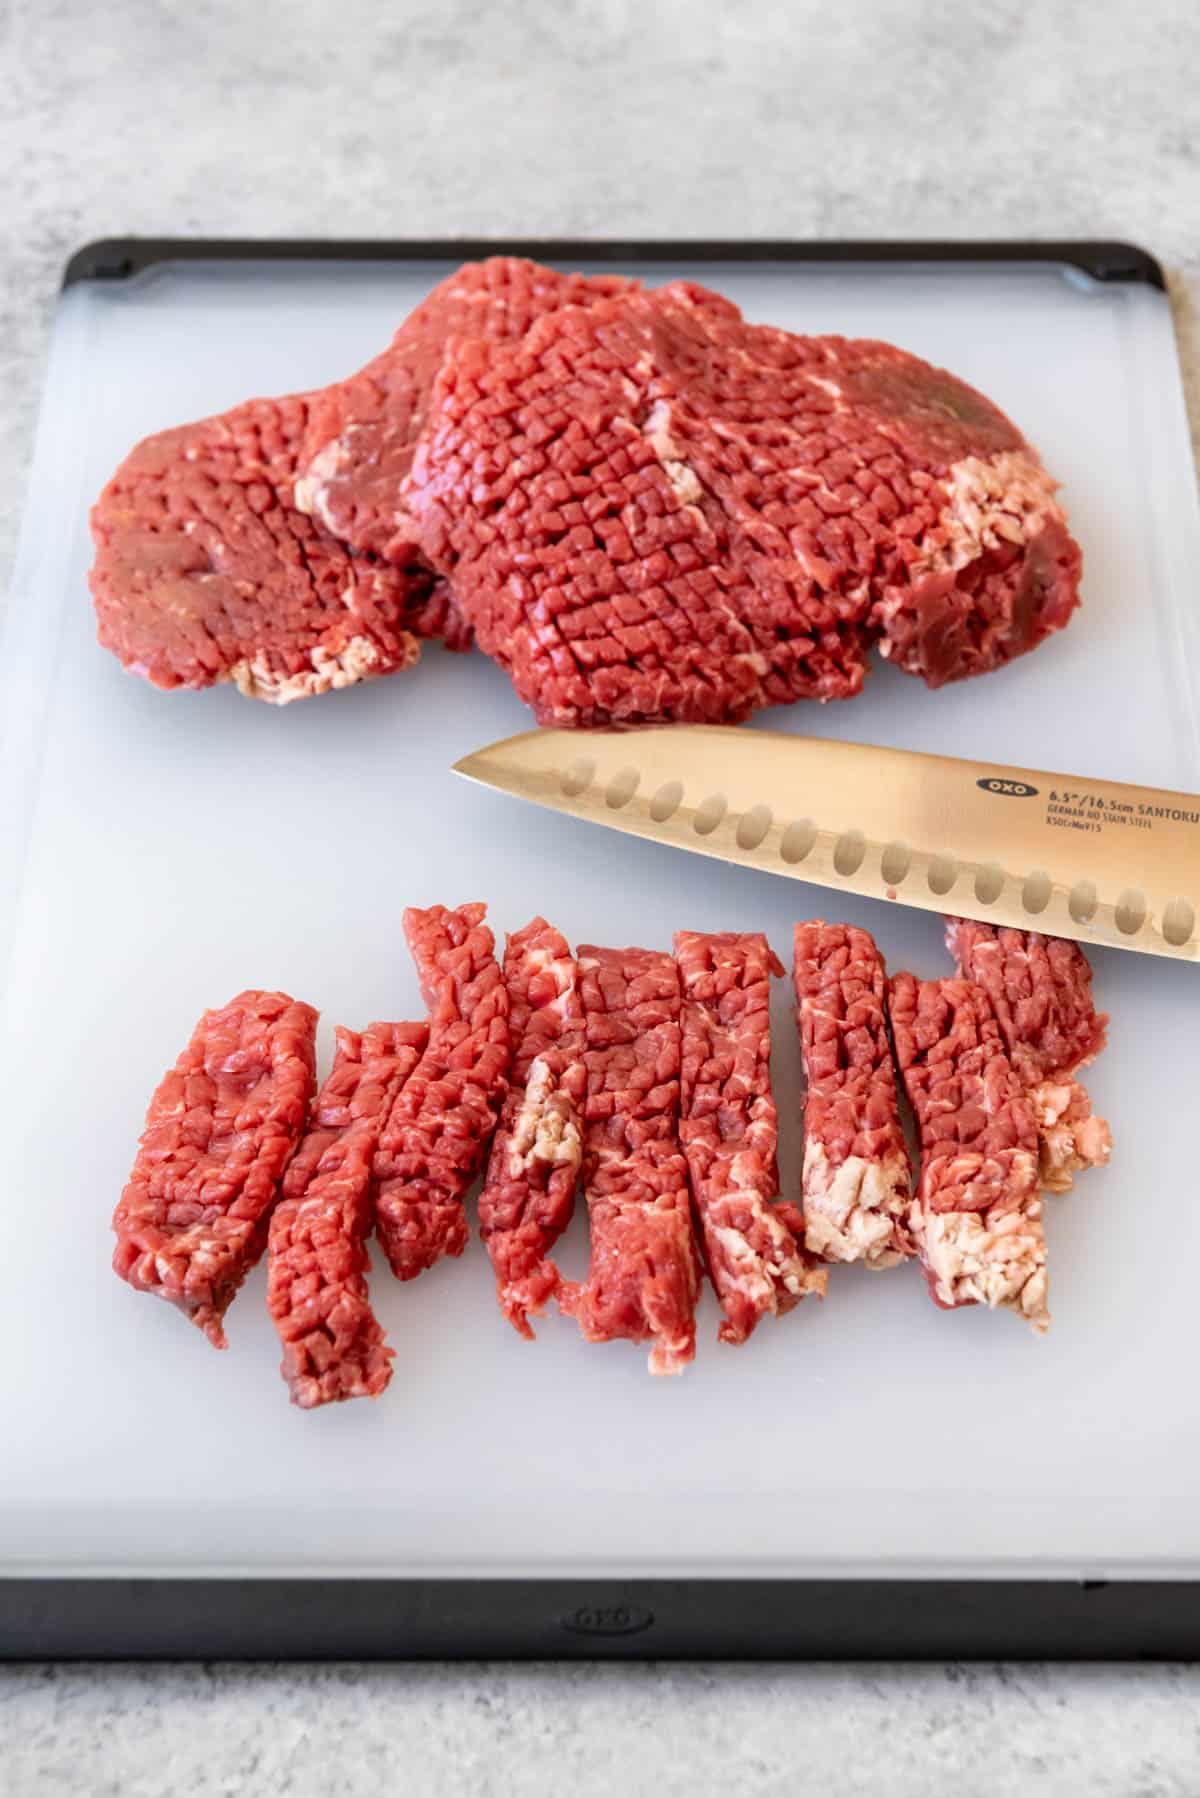 Steak pounded thin and cut into strips.